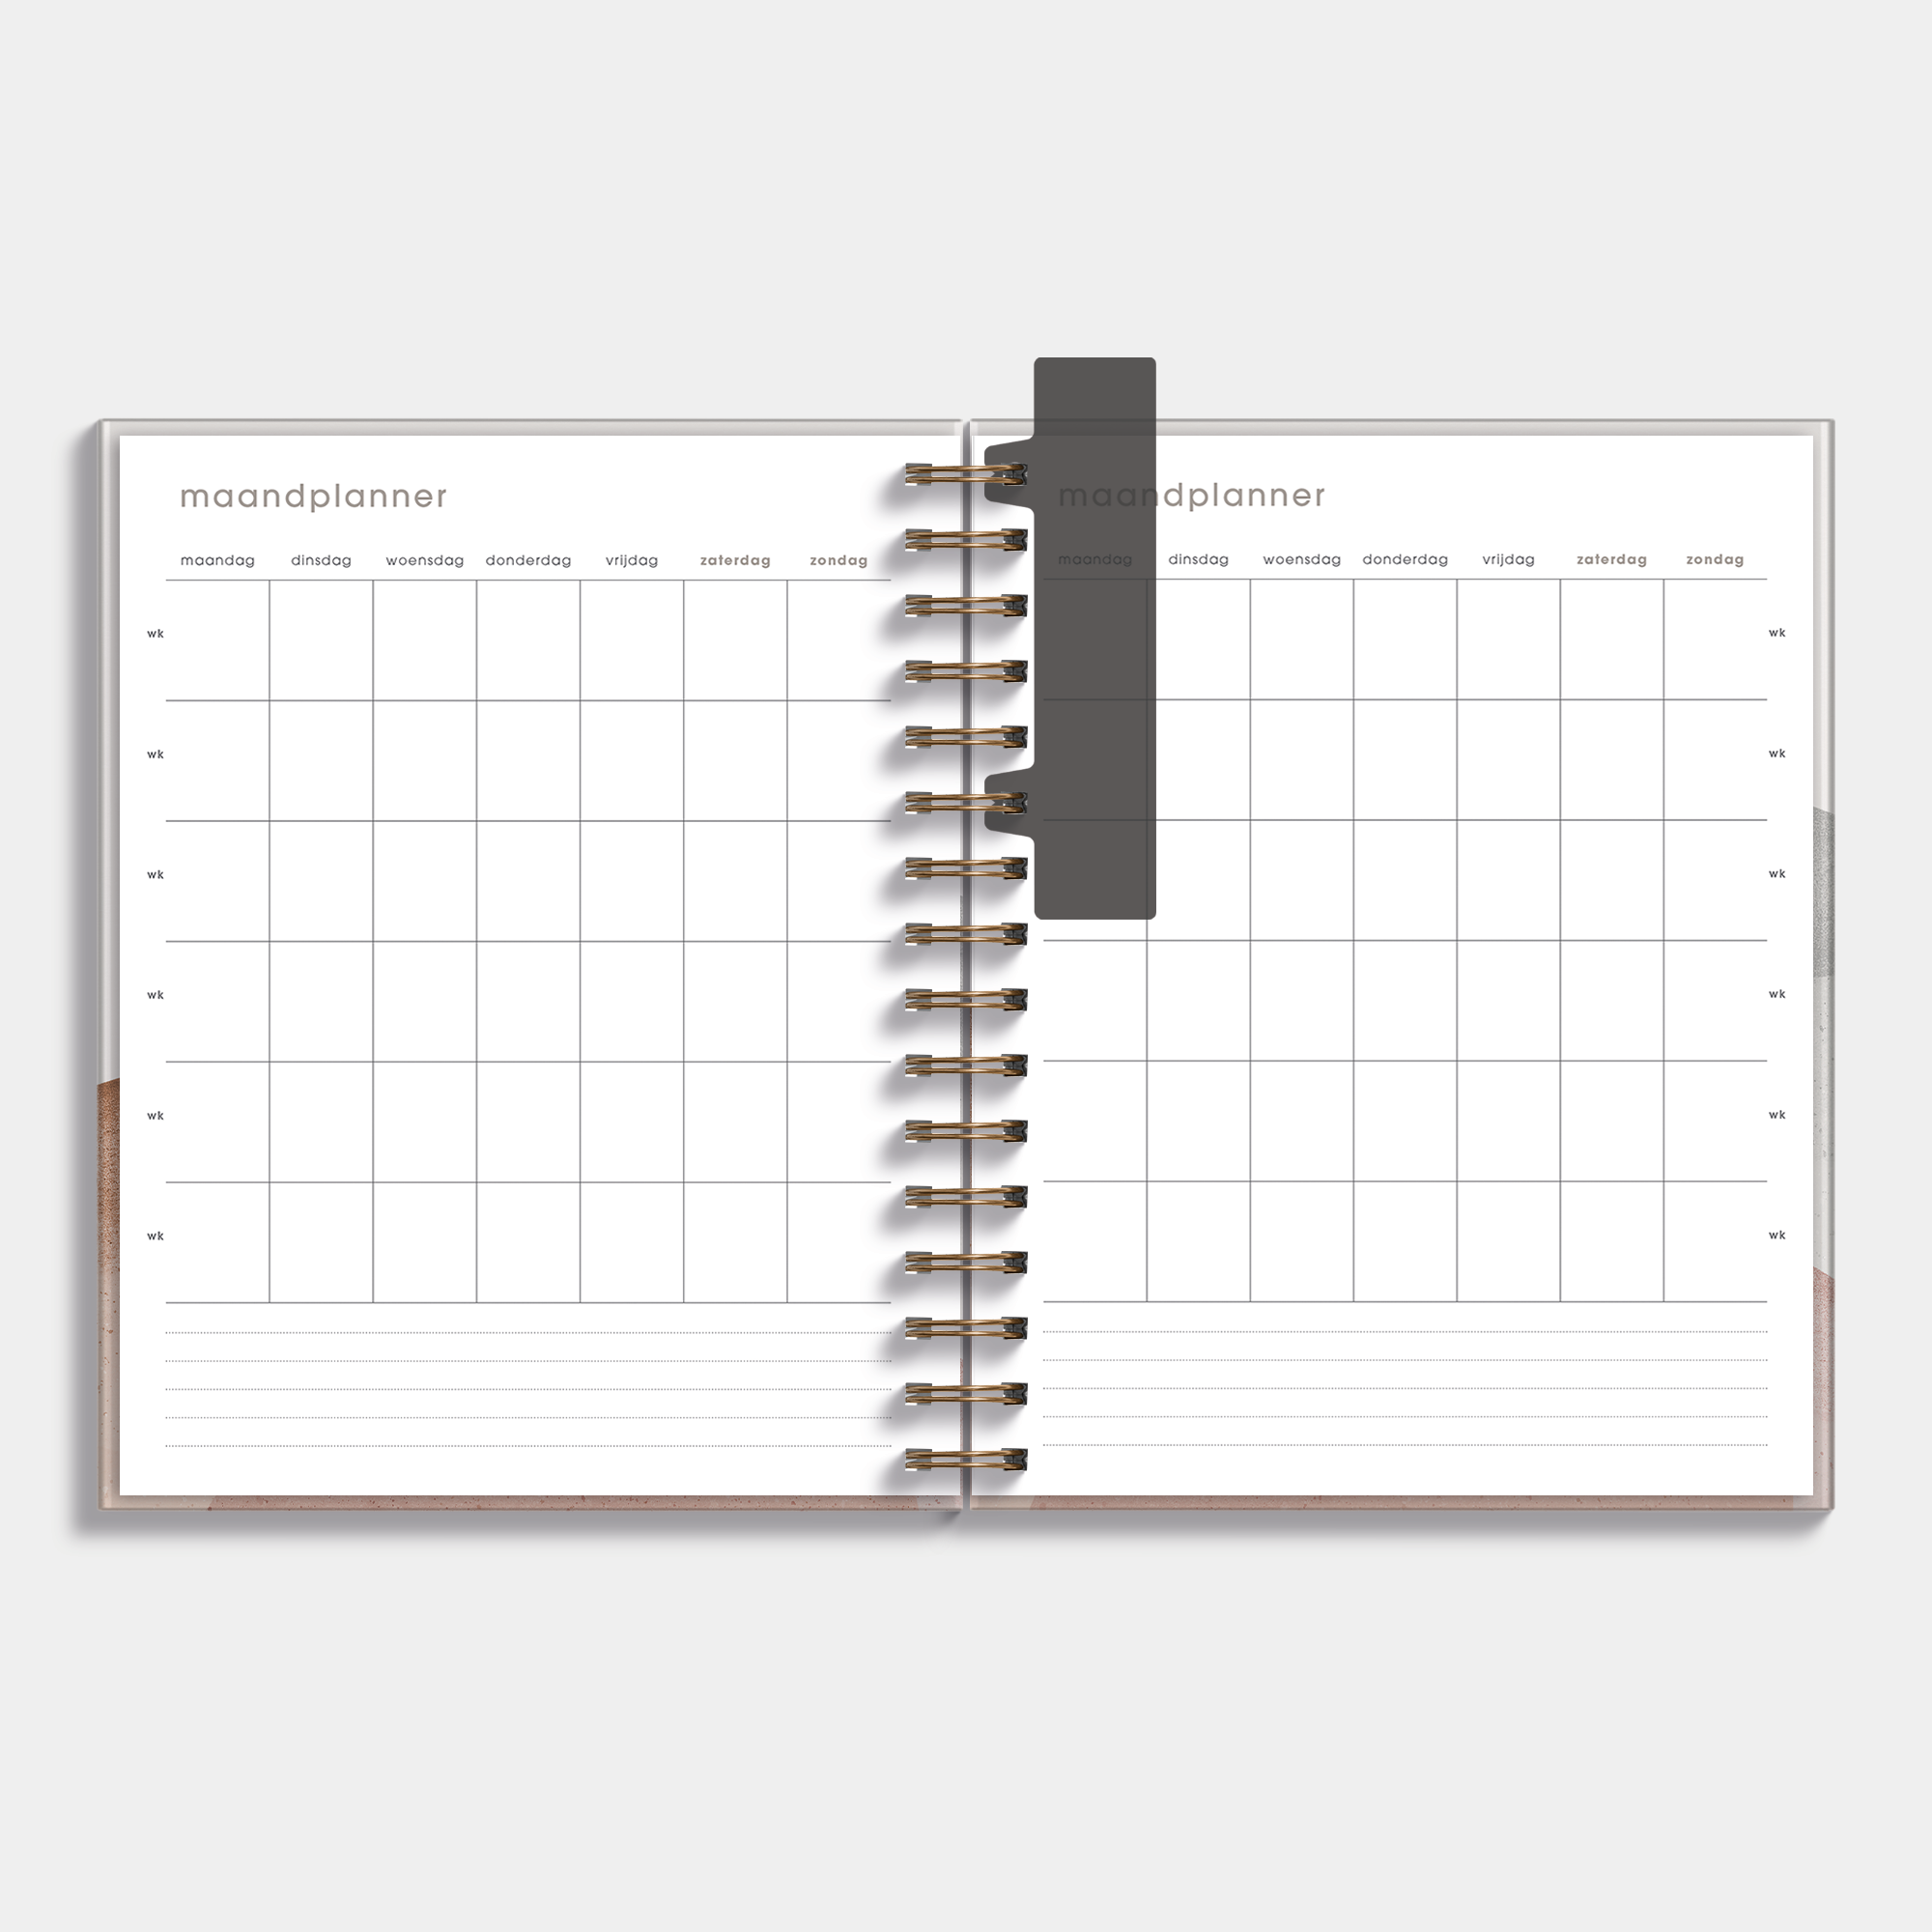 PLANNER UNDATED A5+ ABSTRACT